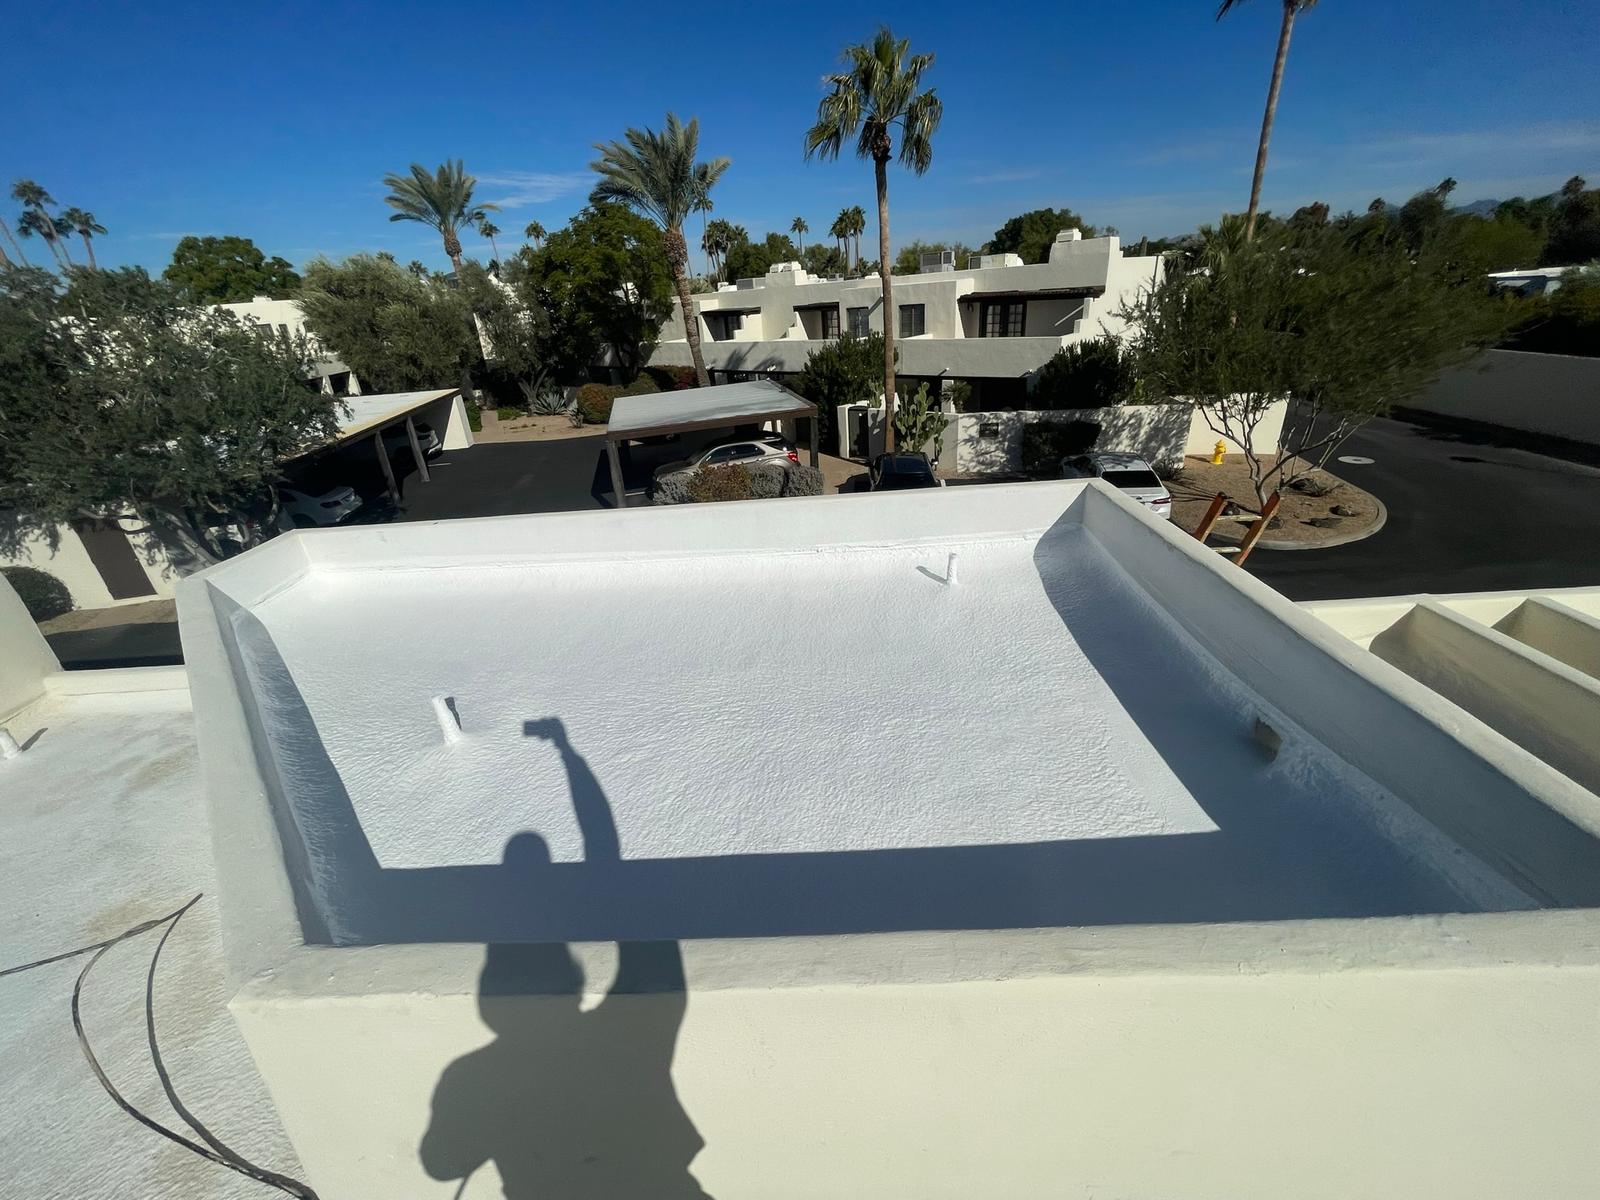 Overview of a foam-coated roof, protective layering by McCormick Ranch experts.